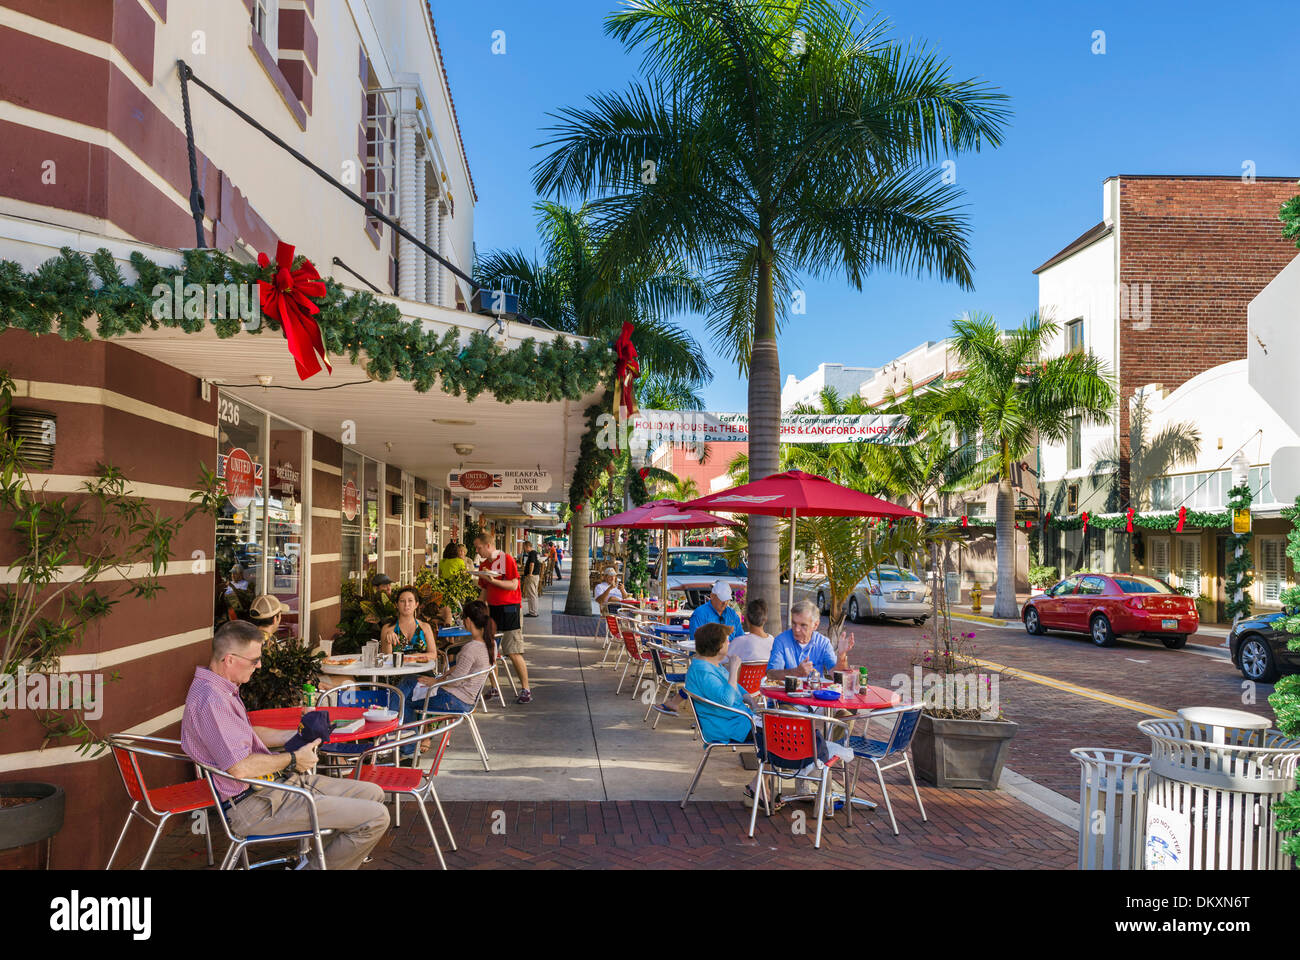 Sidewalk cafe on First Street in historic River District in downtown Fort Myers, Florida, USA Stock Photo